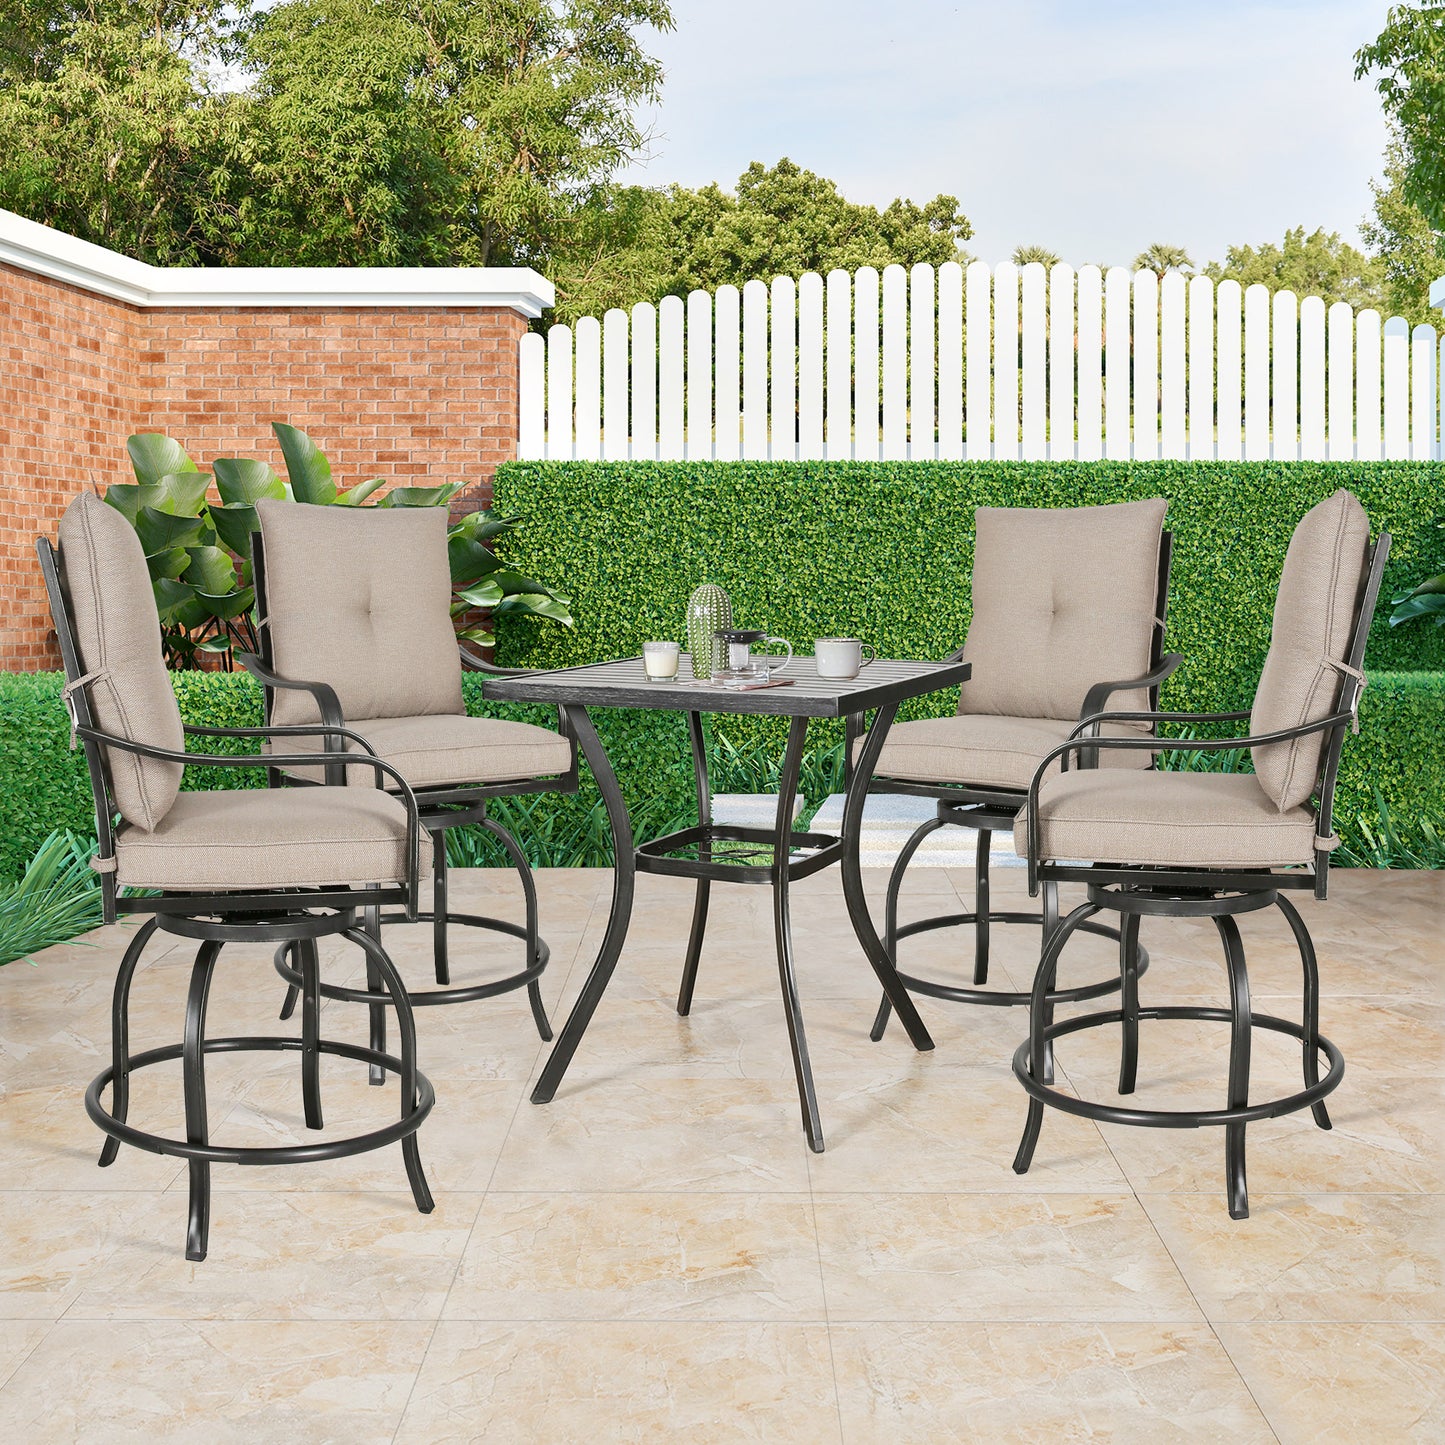 5 Pieces Patio Metal Bar Height Dining Set with Square Bar Table and Swivel Counter Stools with Cushions (Beige)